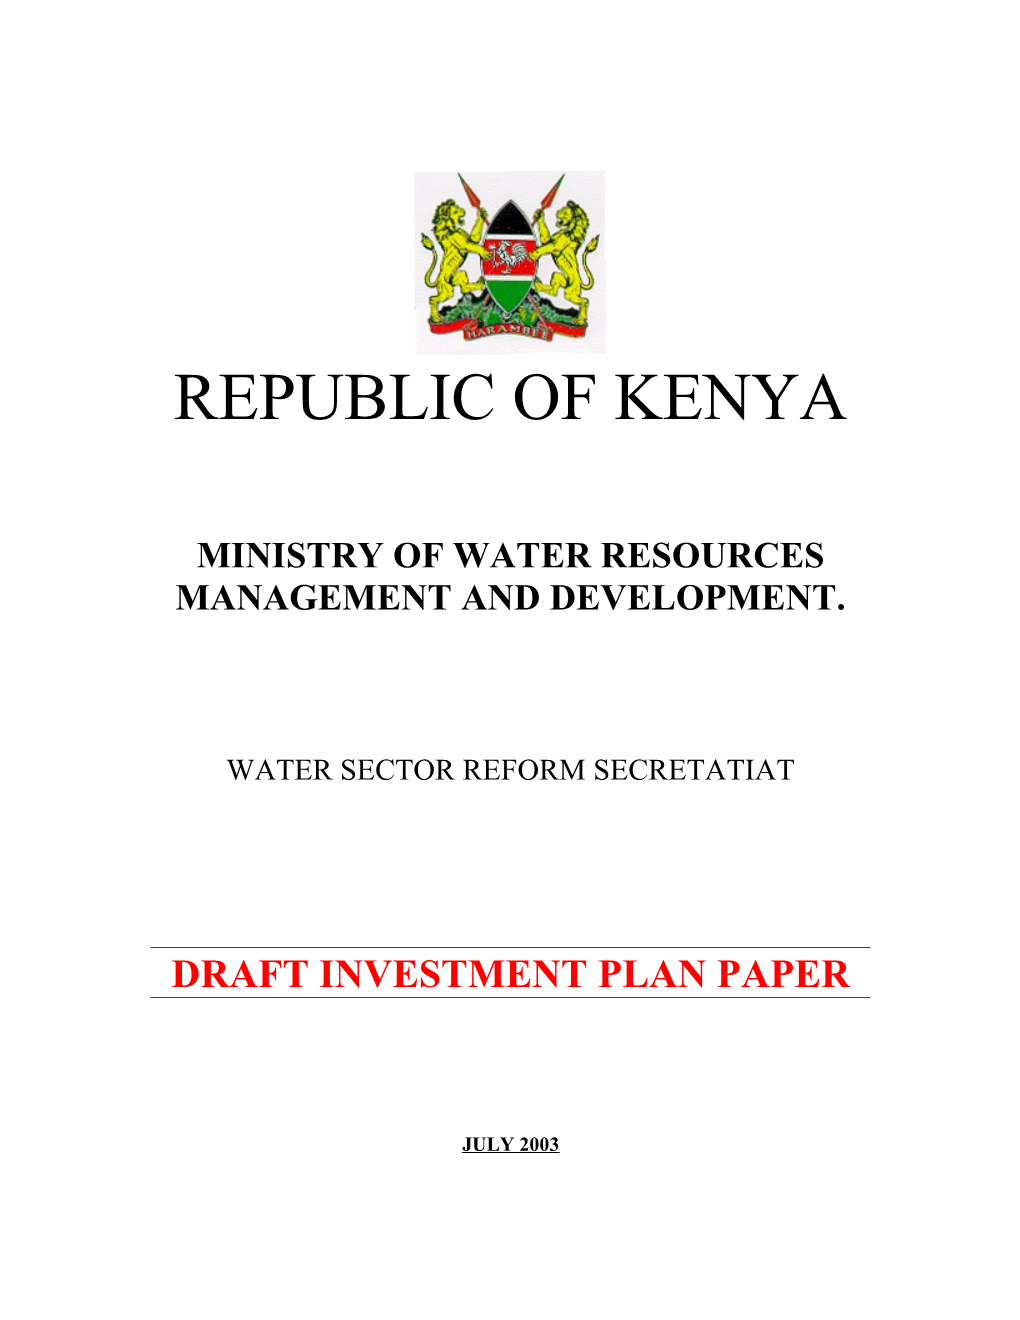 Ministry of Water Resources Management and Development